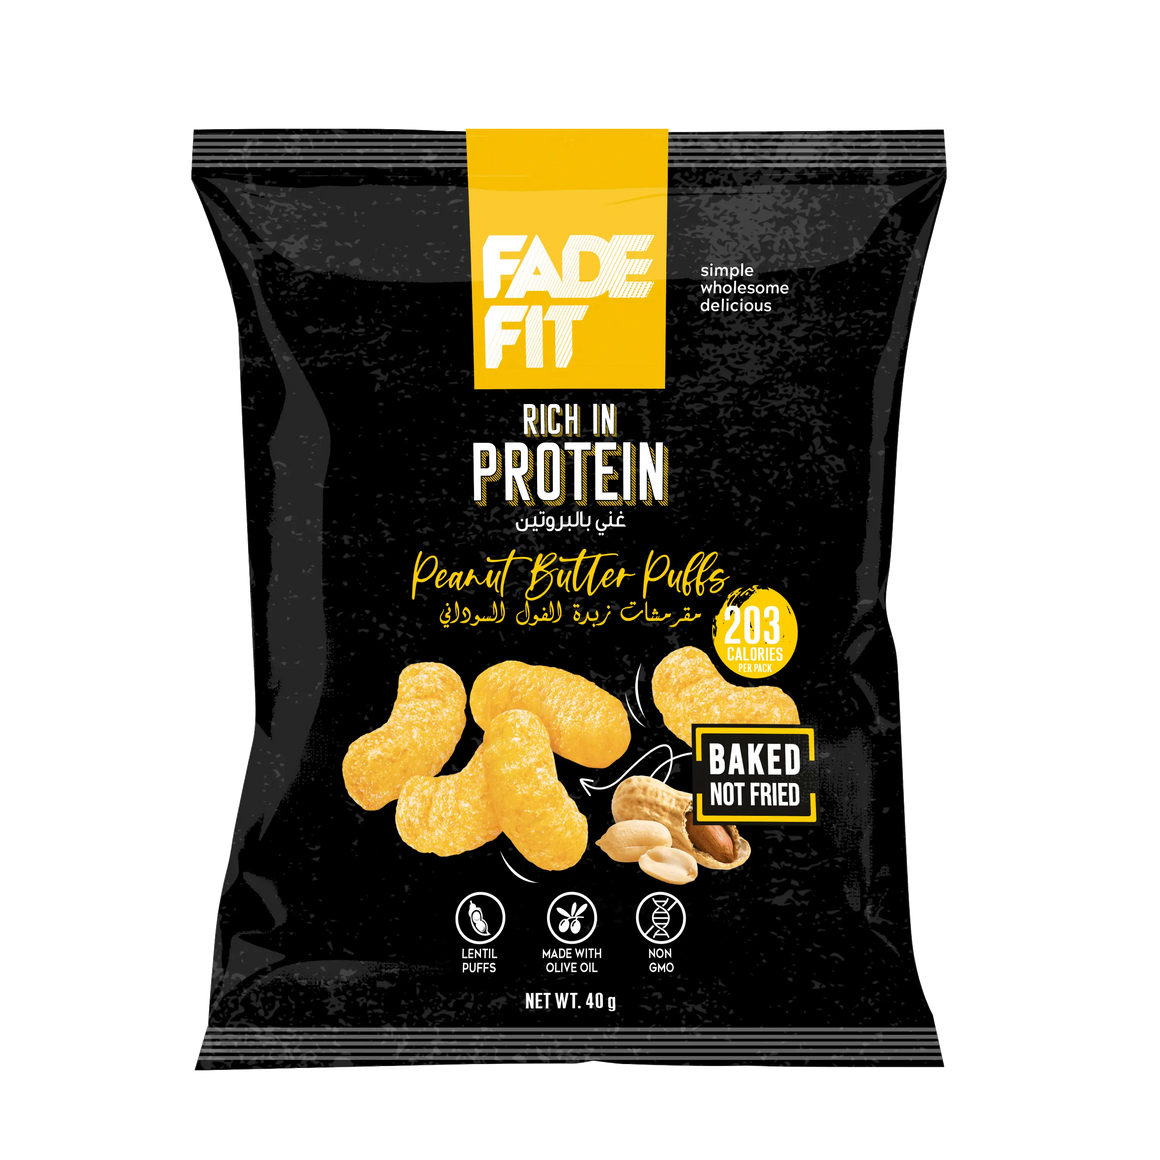 Fade Fit - Peanut Butter Puffs, Rich in Protein, Baked, NON GMO 40gm Fade Fit